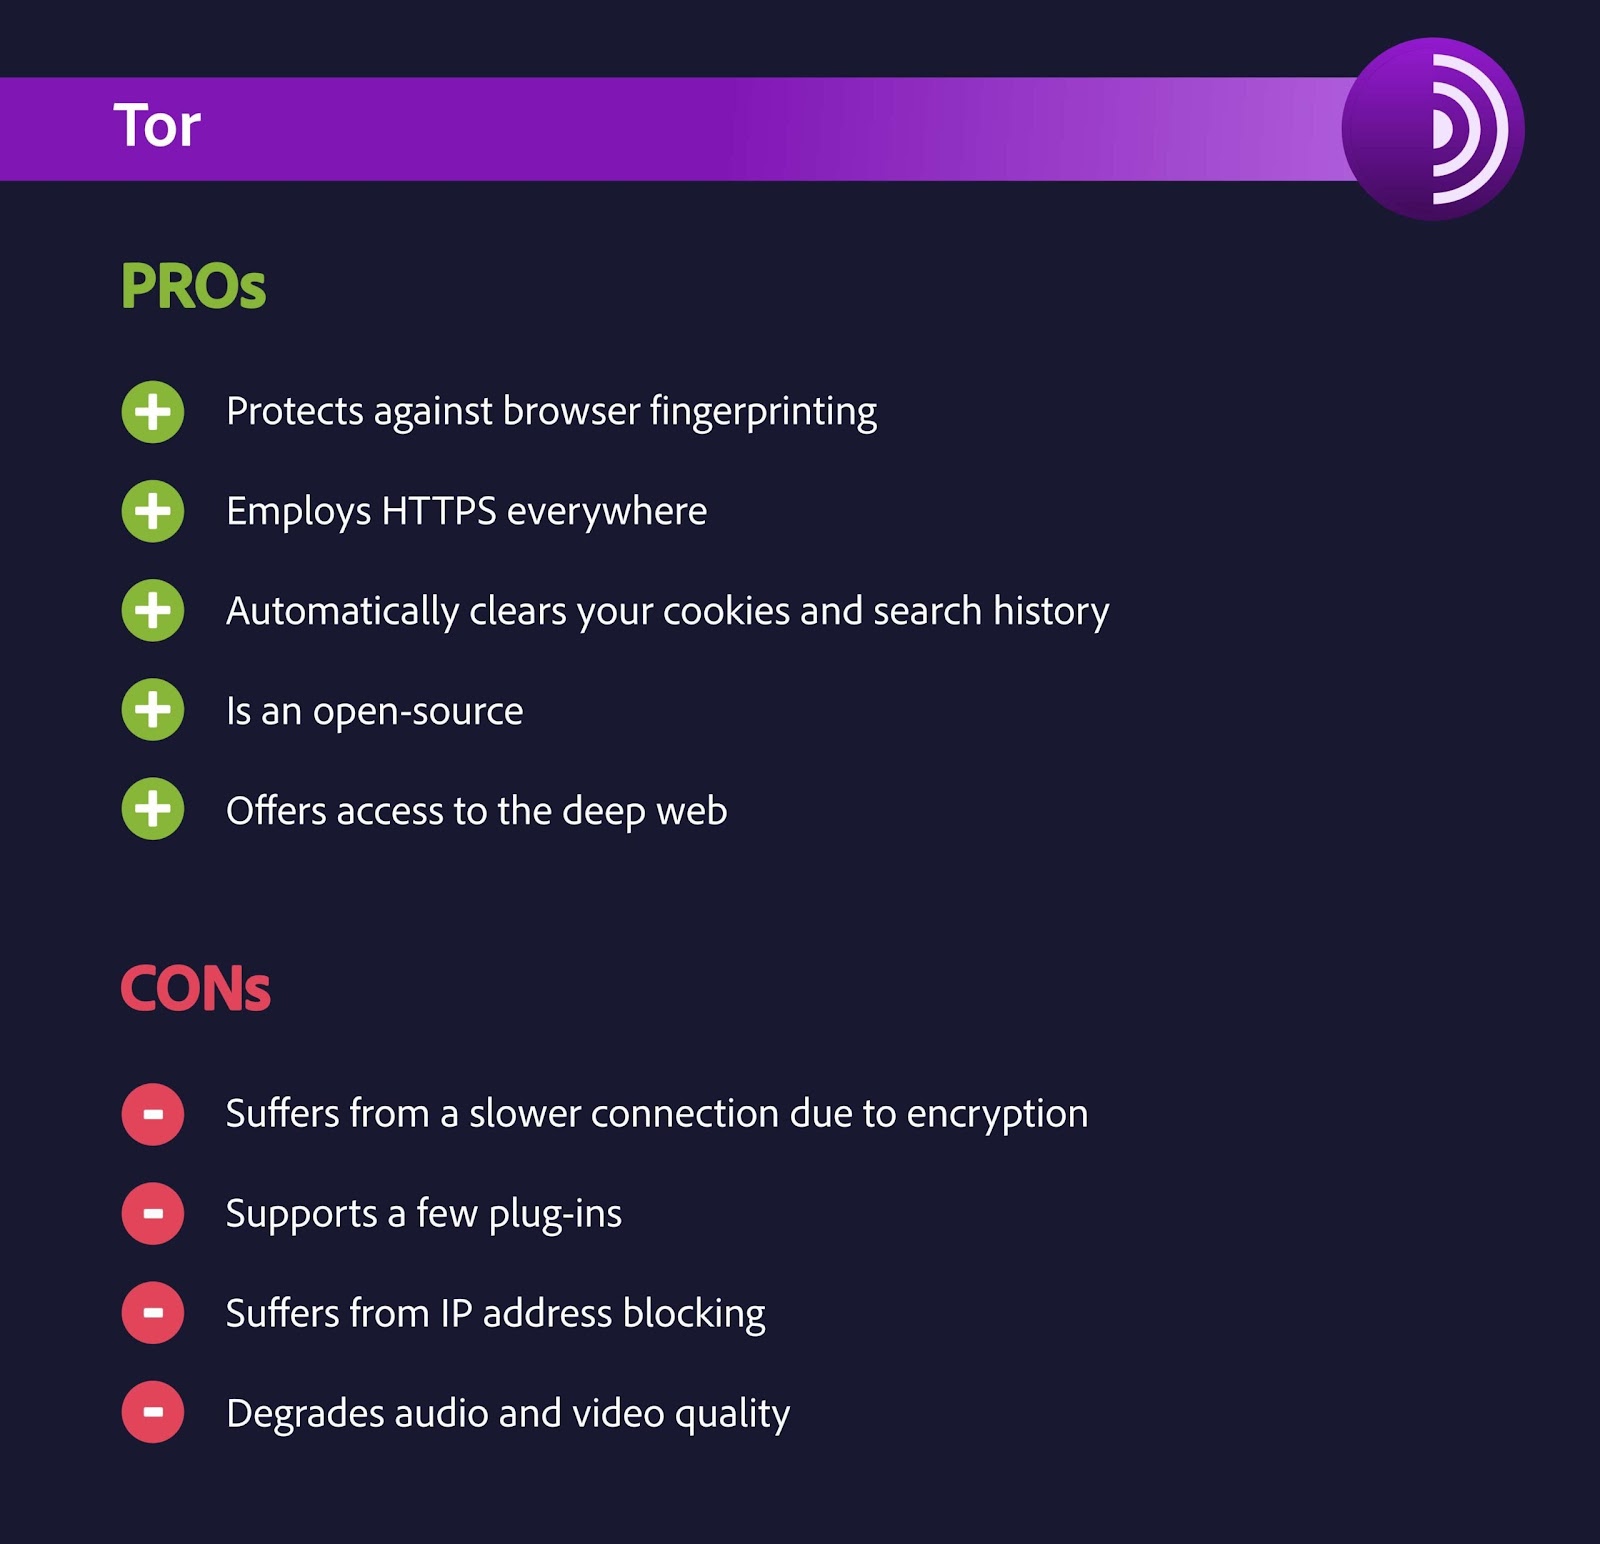 pros cons tor browser